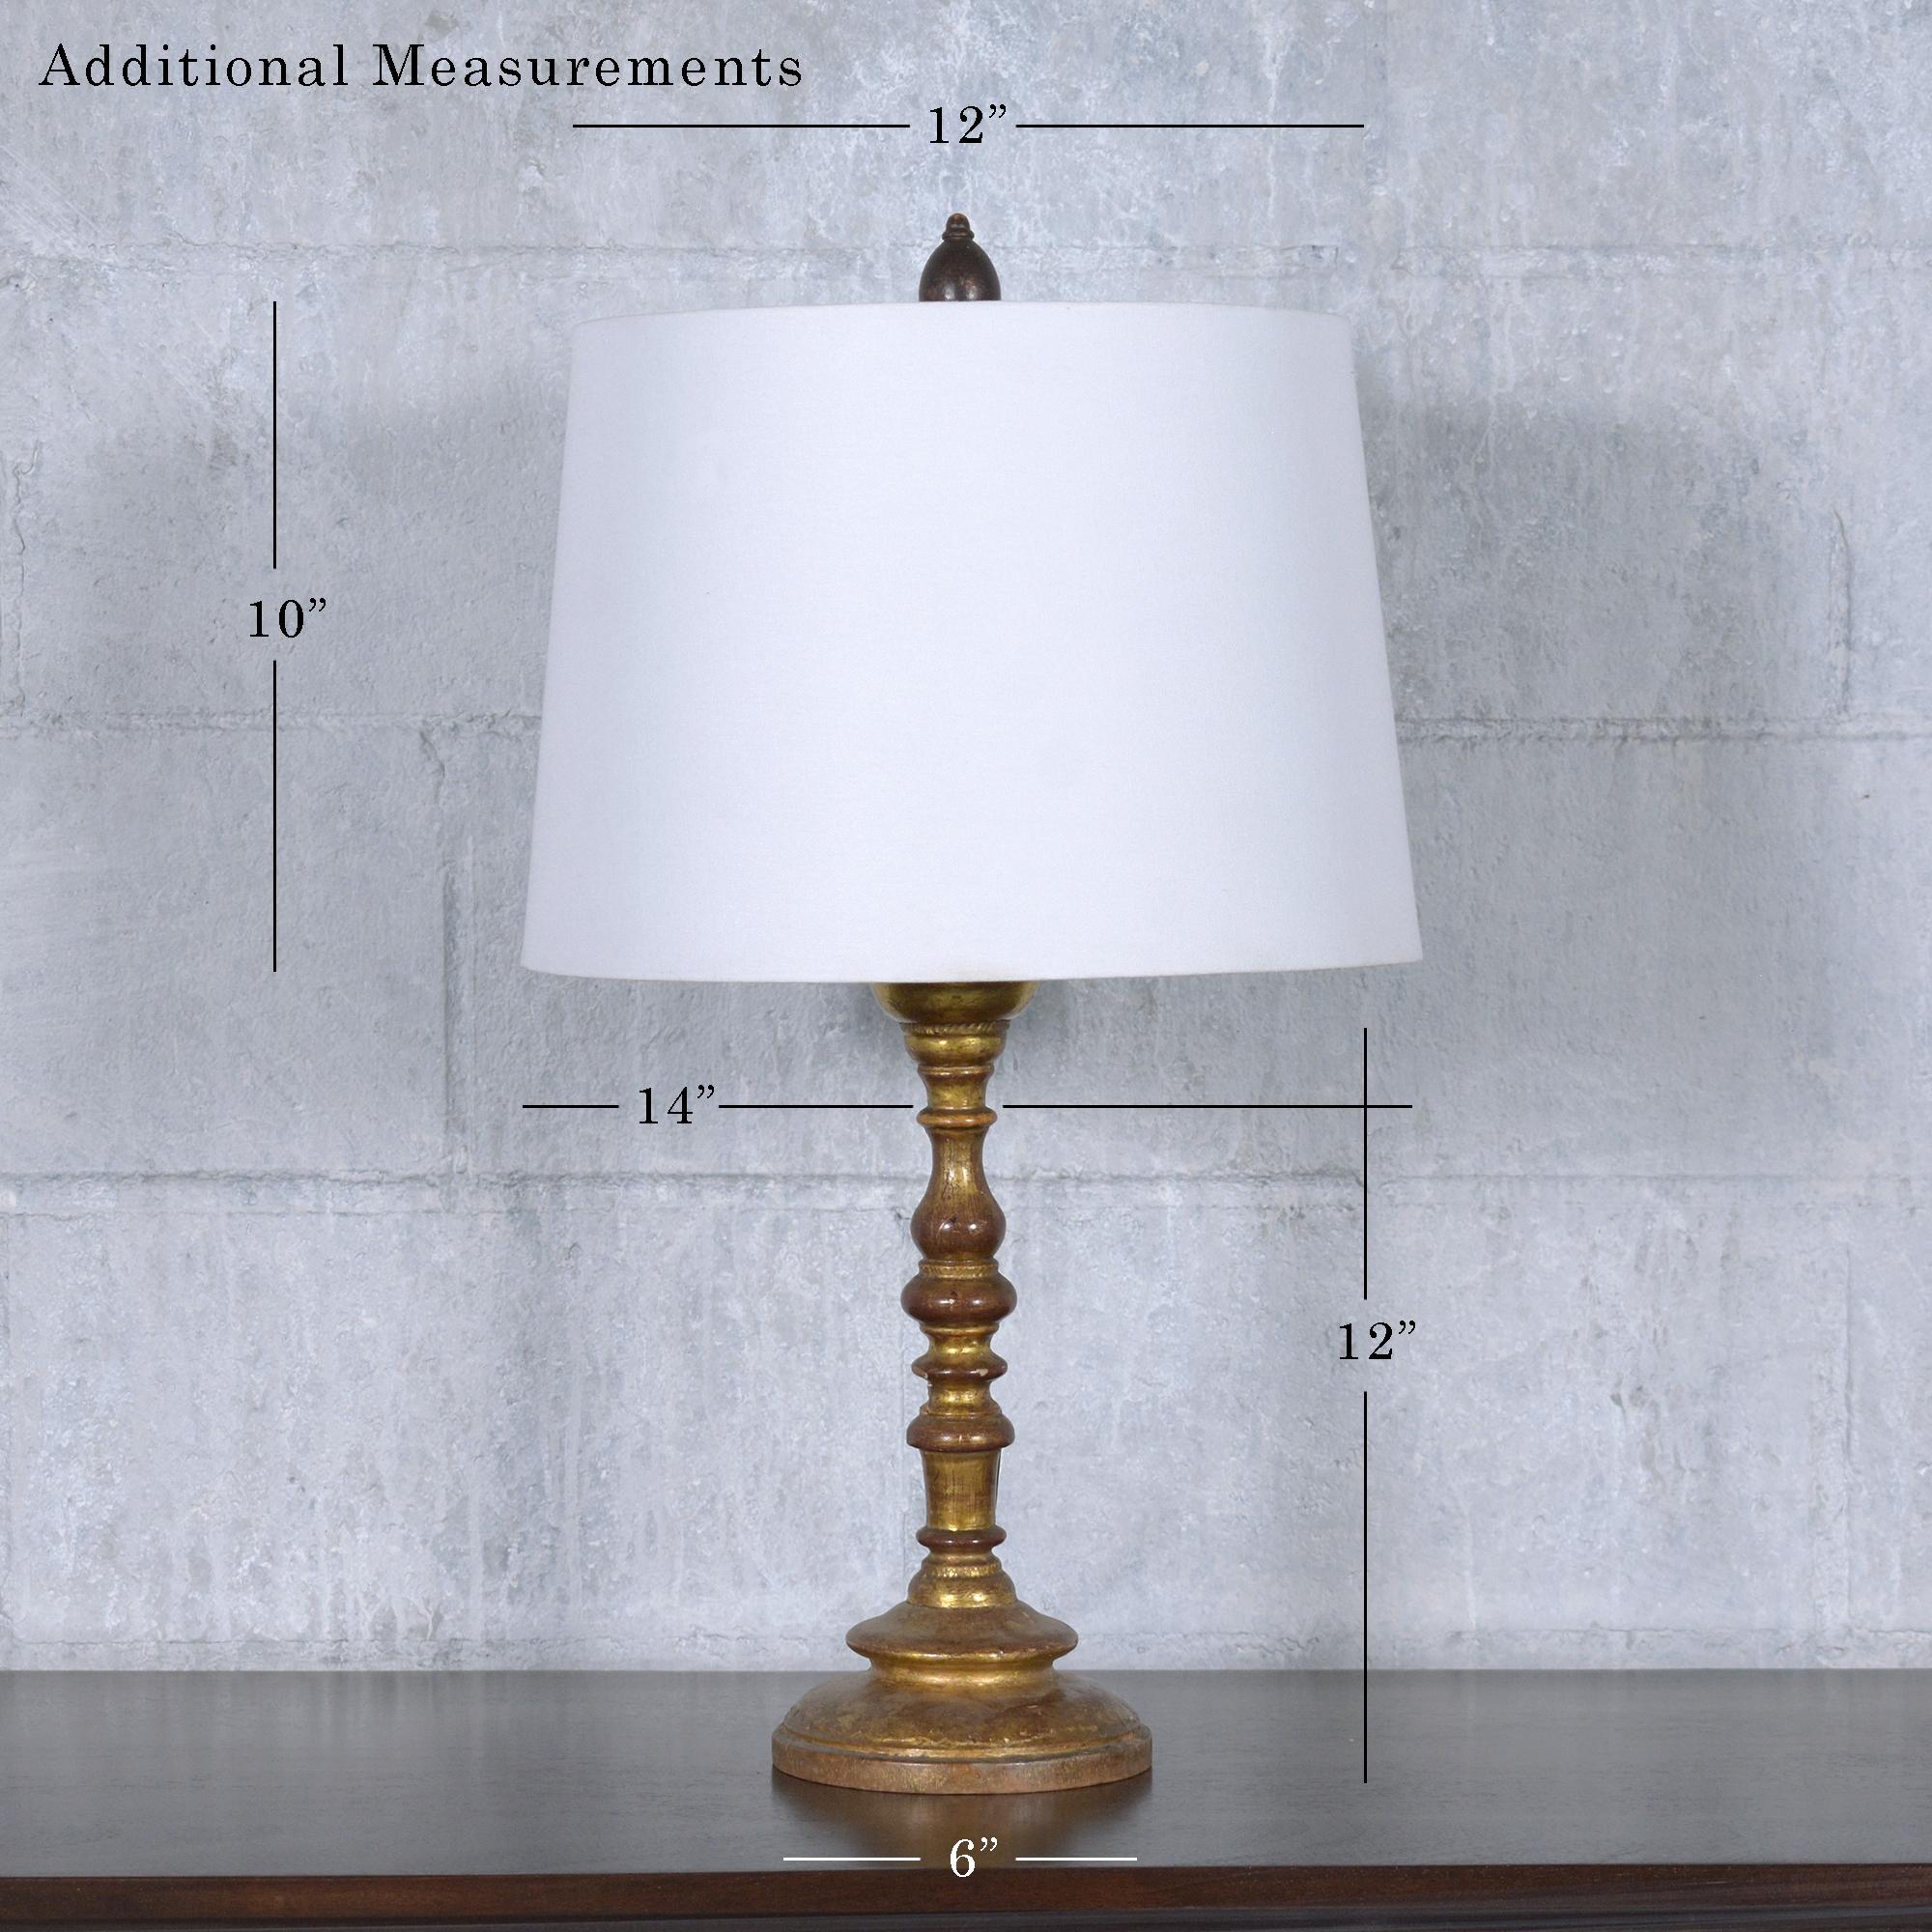 Step back in time with our exquisite 19th-century table lamp, a piece that beautifully bridges the gap between history and modern functionality. Expertly hand-crafted from wood, this lamp is in great condition, testament to the enduring